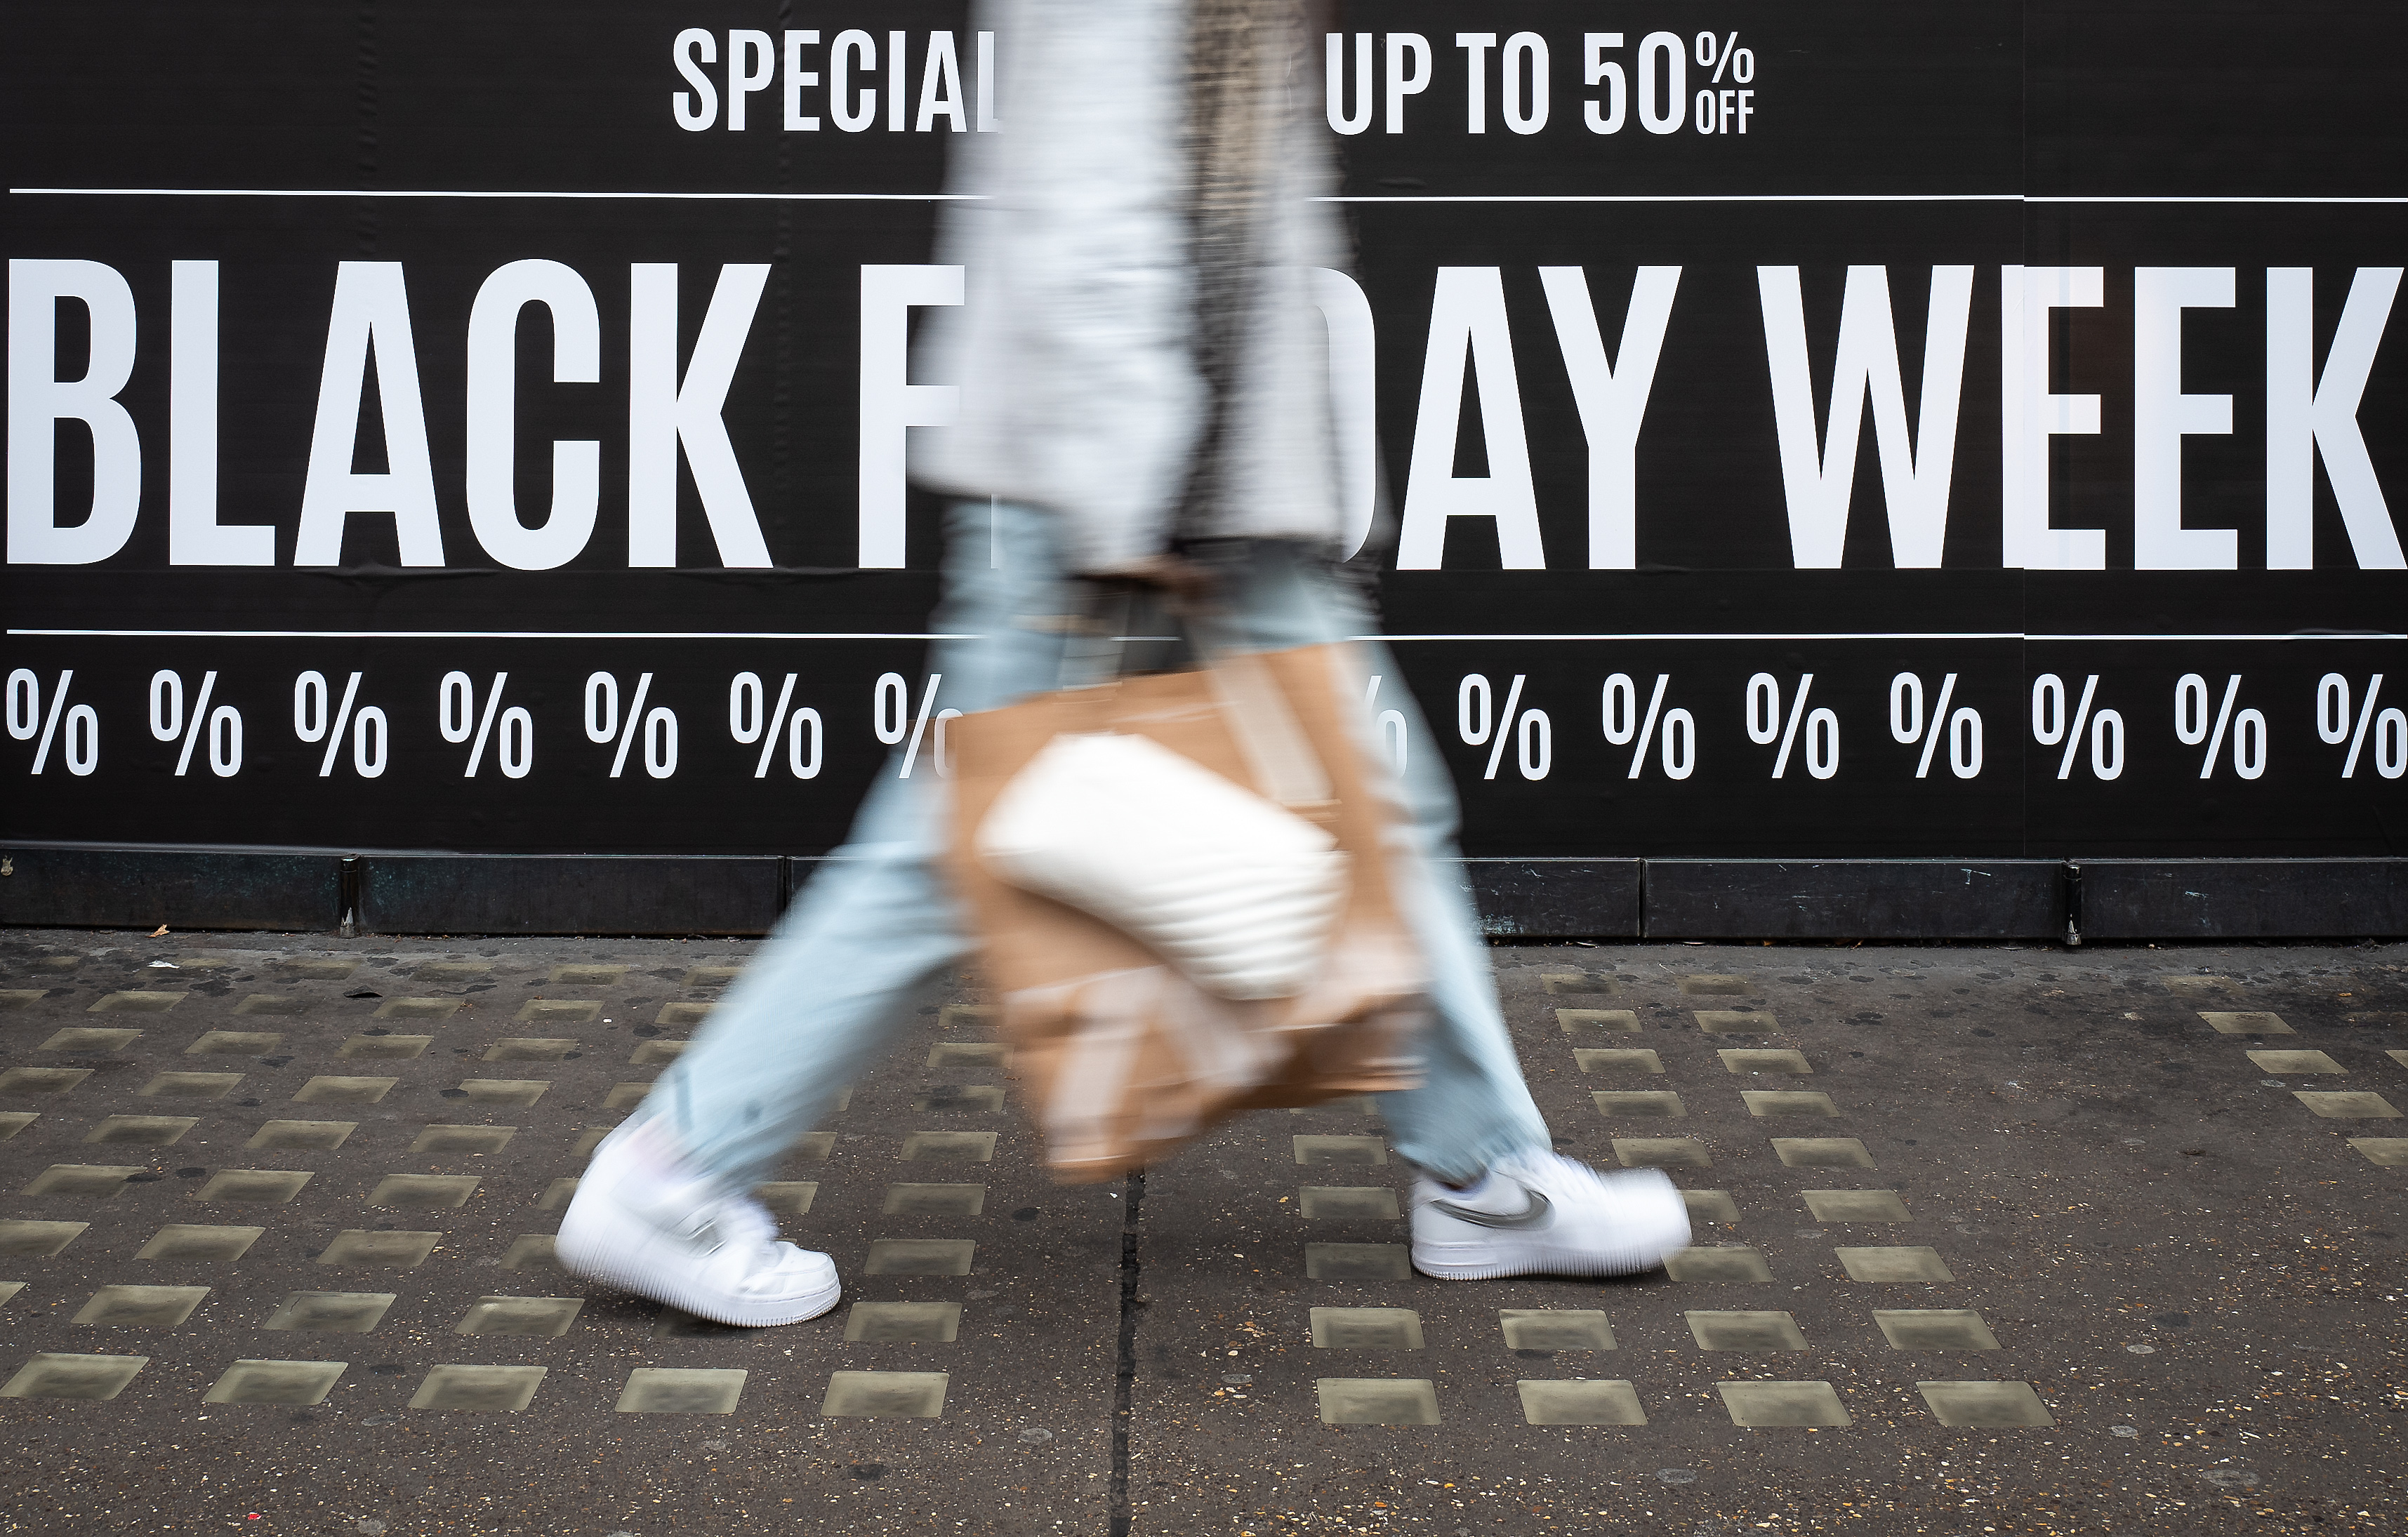 Image of a blurry shopper in London holding a brown bag while walking past an advertisement that says “Black Friday Week.”